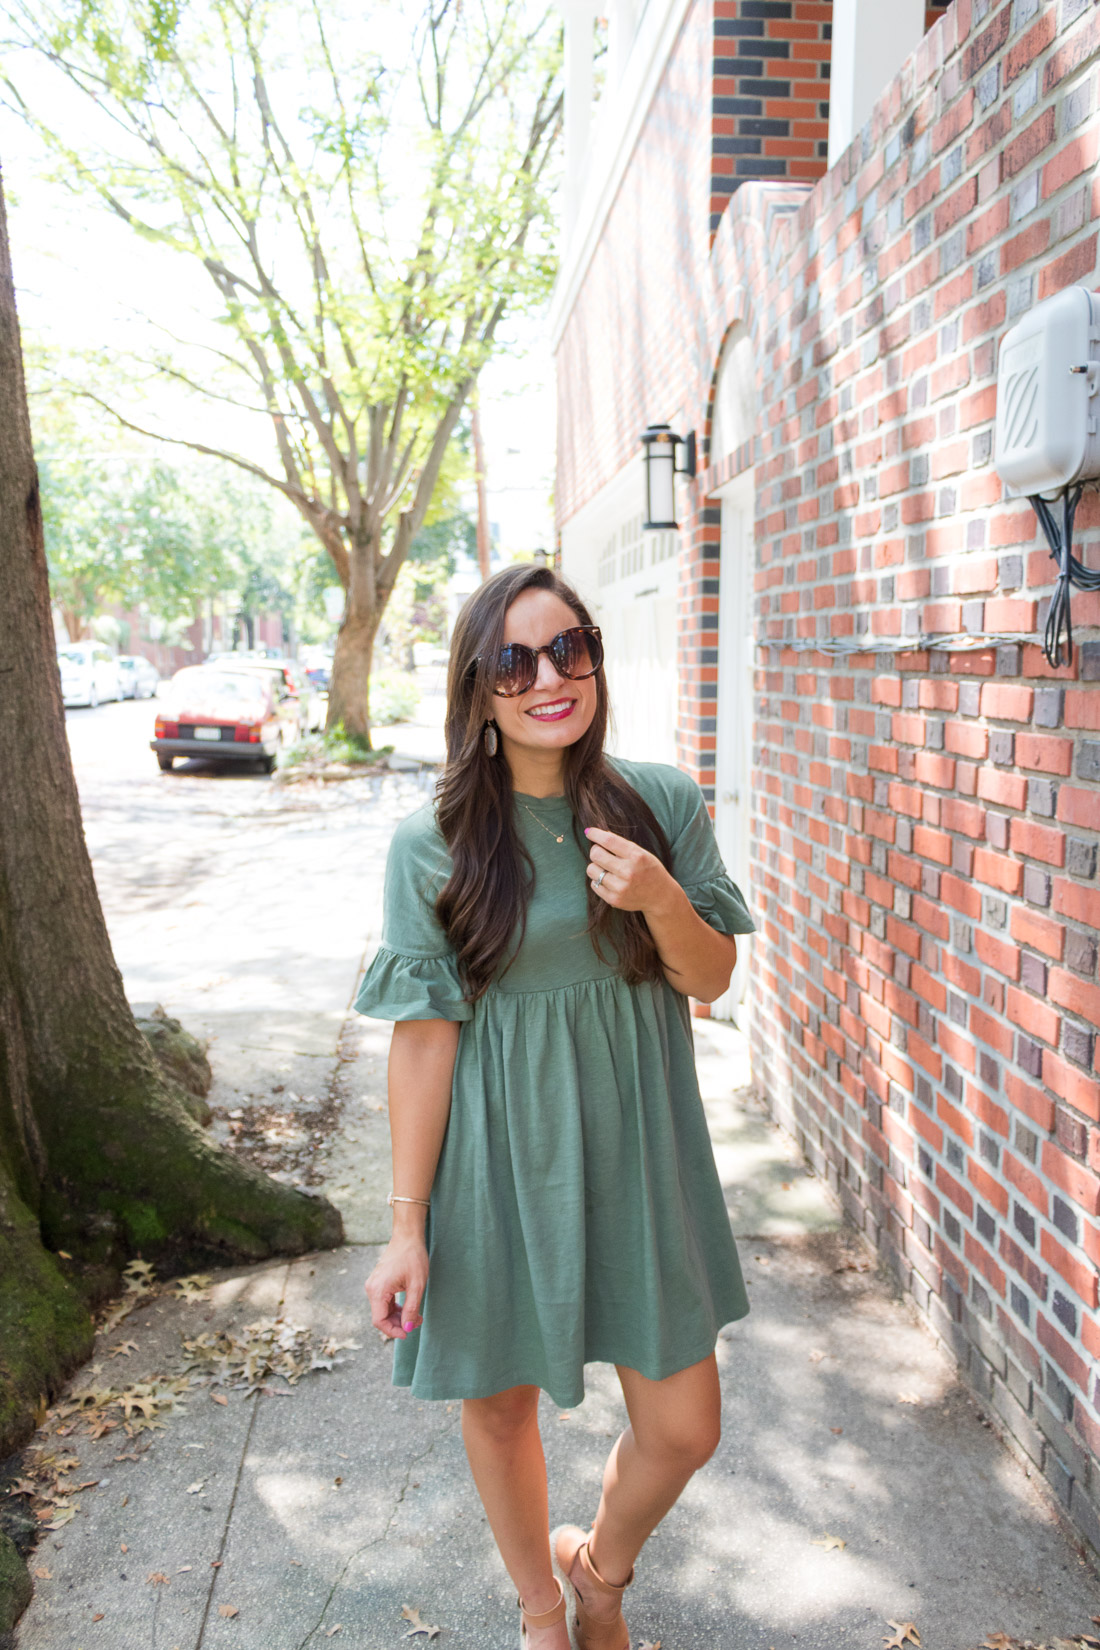 12 outfit ideas for larger busted petites -Bomb Petite